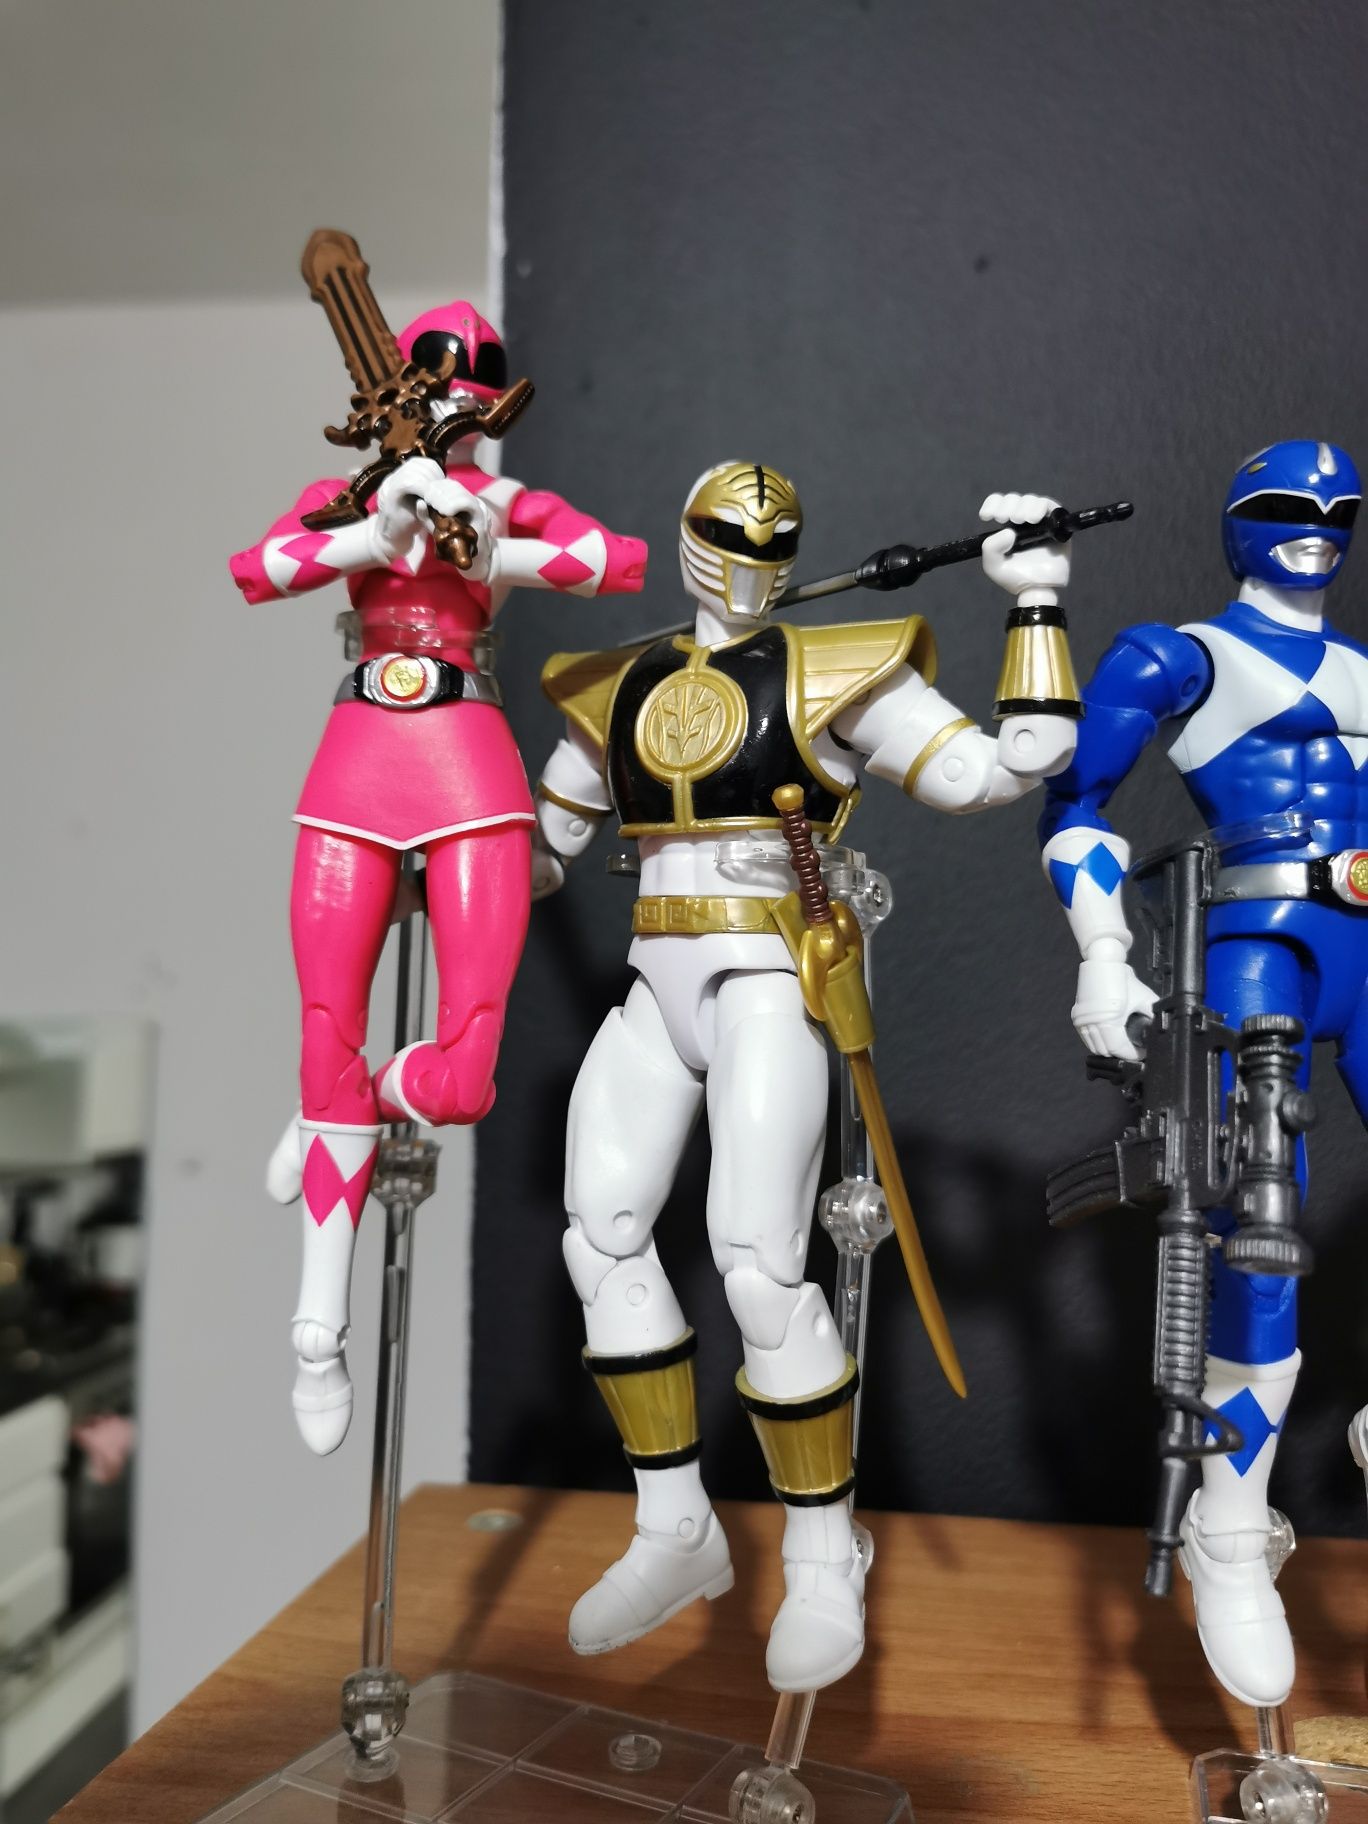 Power rangers lightning collection